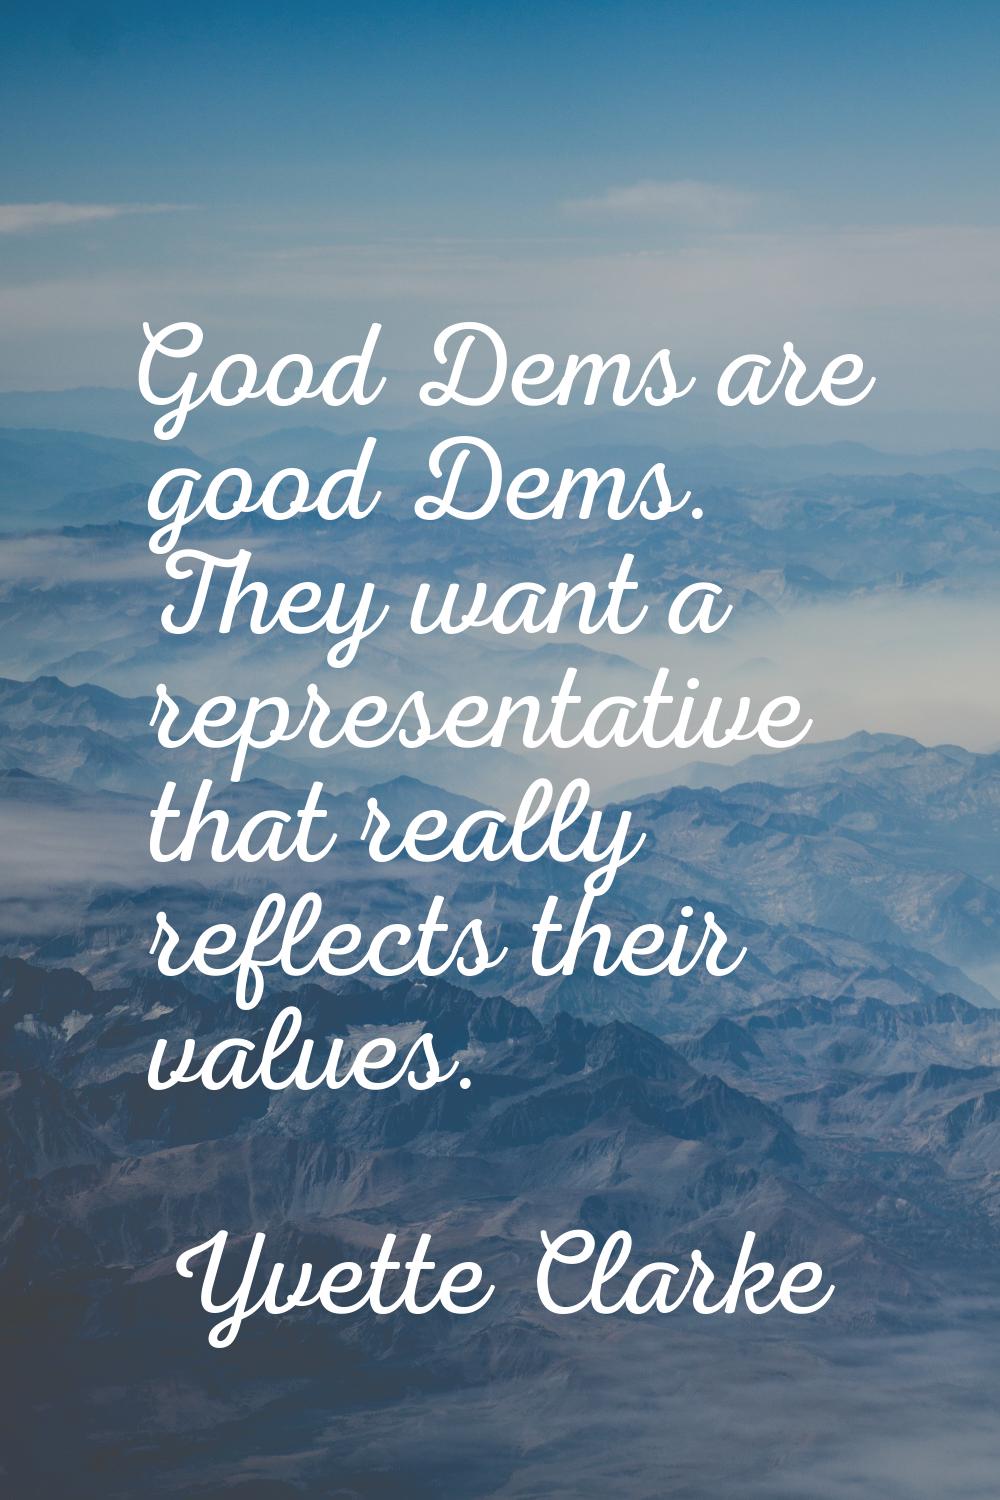 Good Dems are good Dems. They want a representative that really reflects their values.